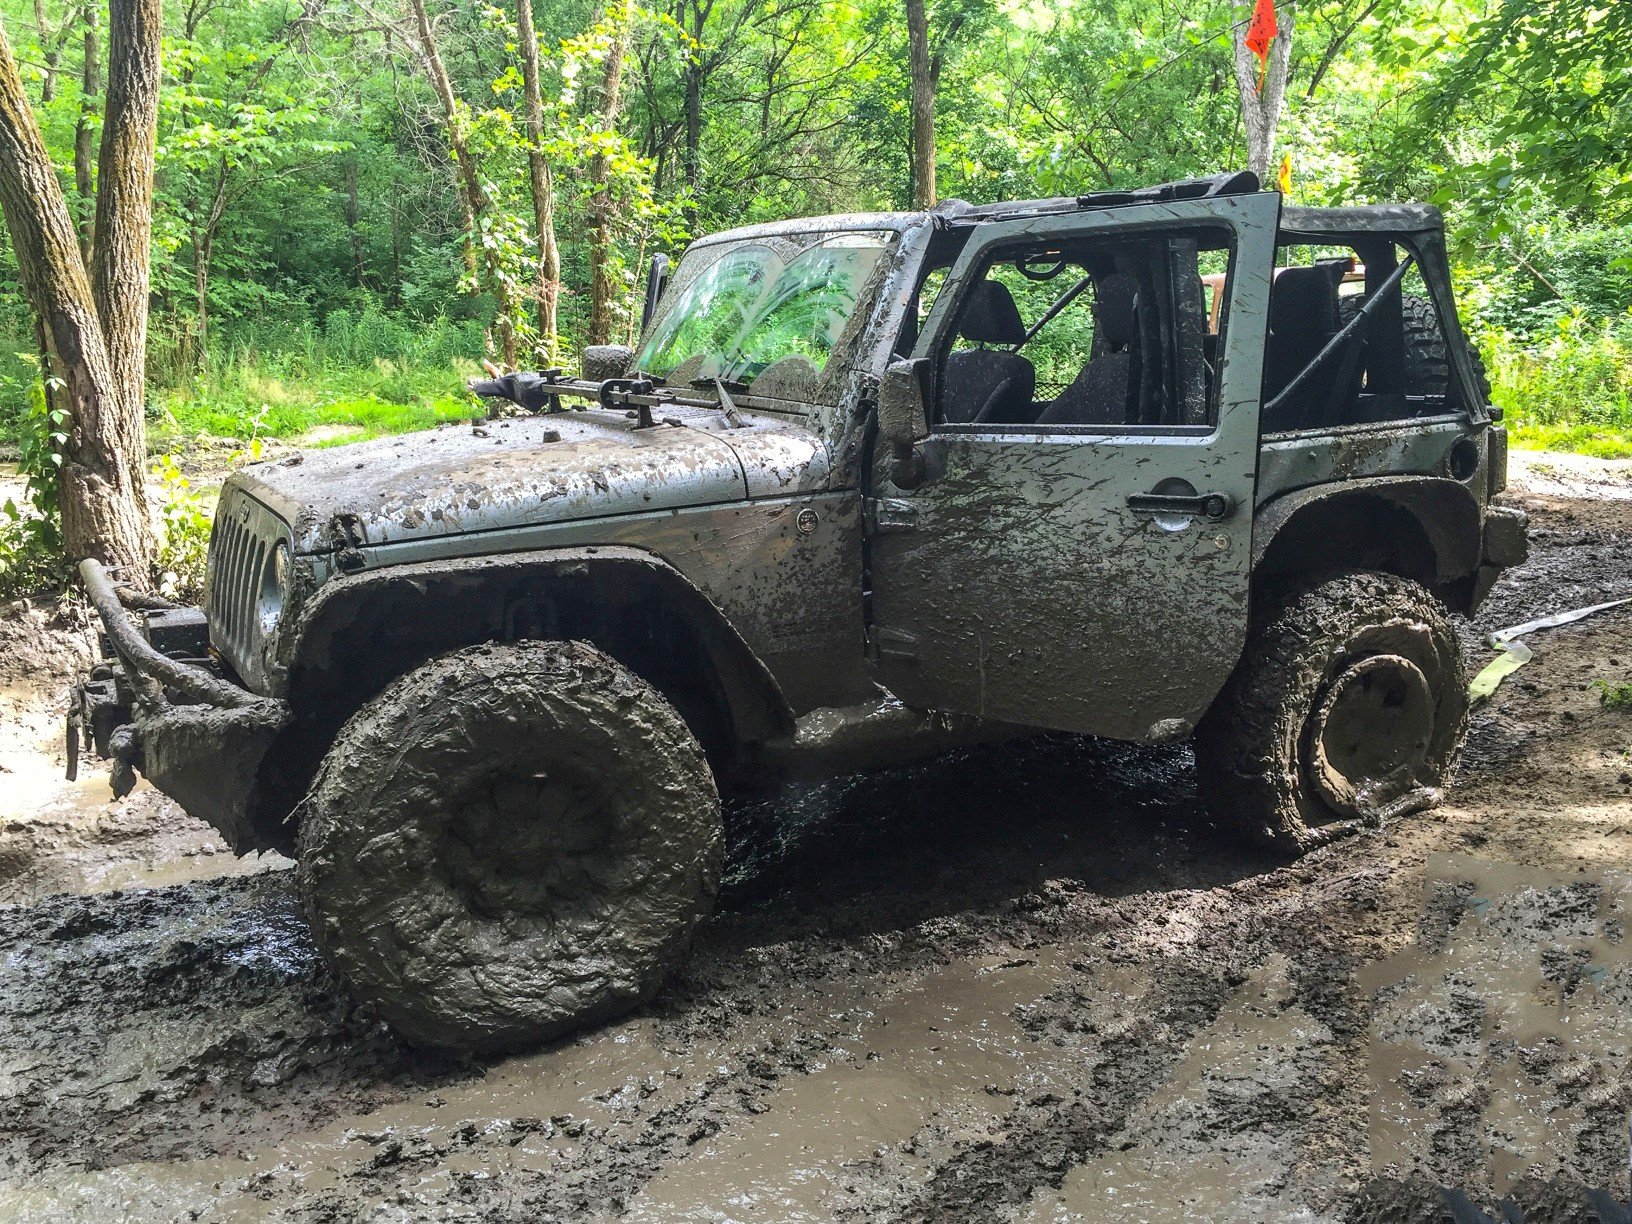 Jeep stuck in the mud off-road